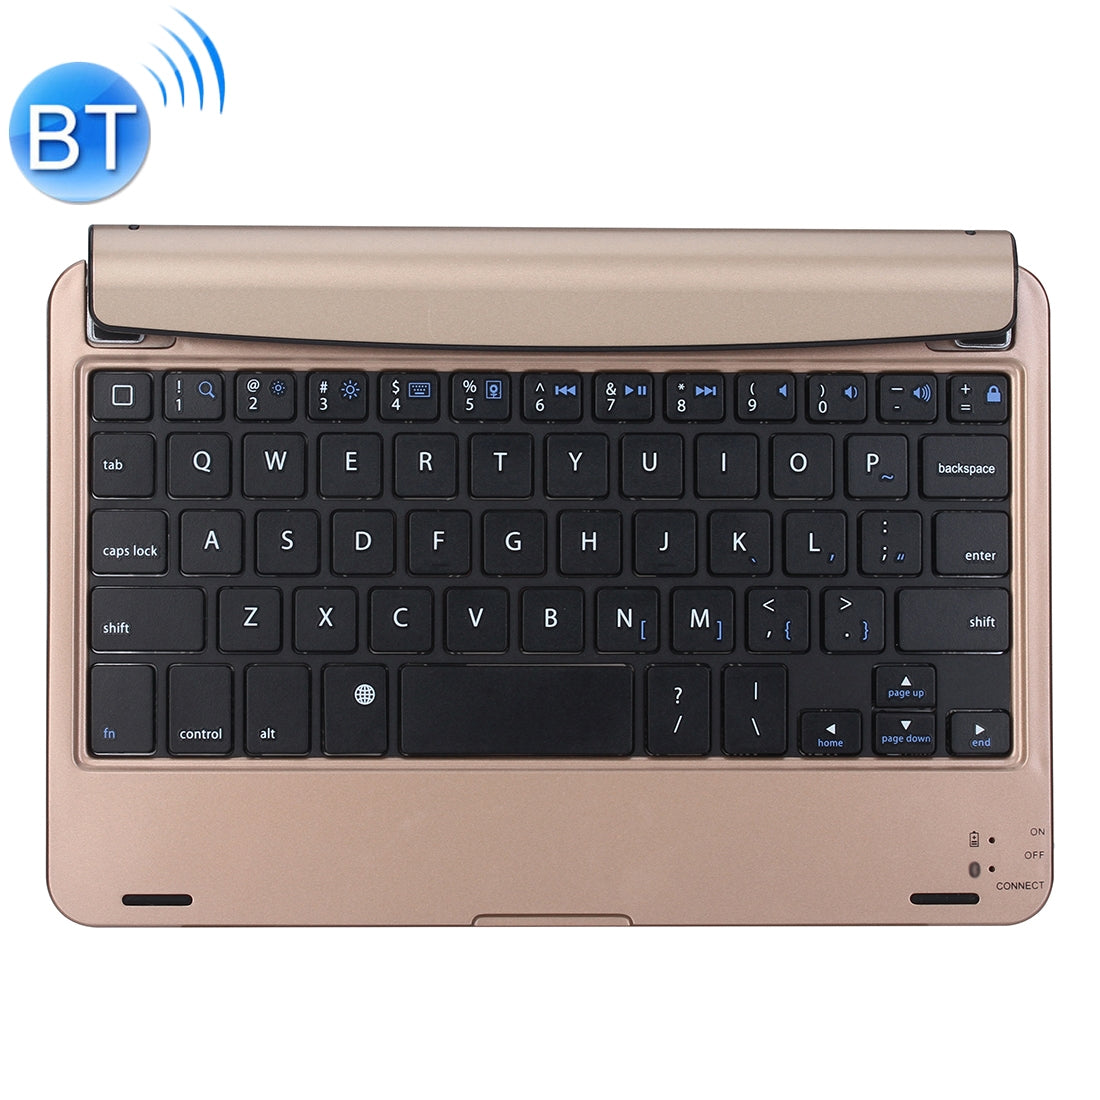 P1302-2 For iPad mini 4 Plug-in Card Slot Plastic Bluetooth Keyboard Protective Cover with Stand Function (Gold)